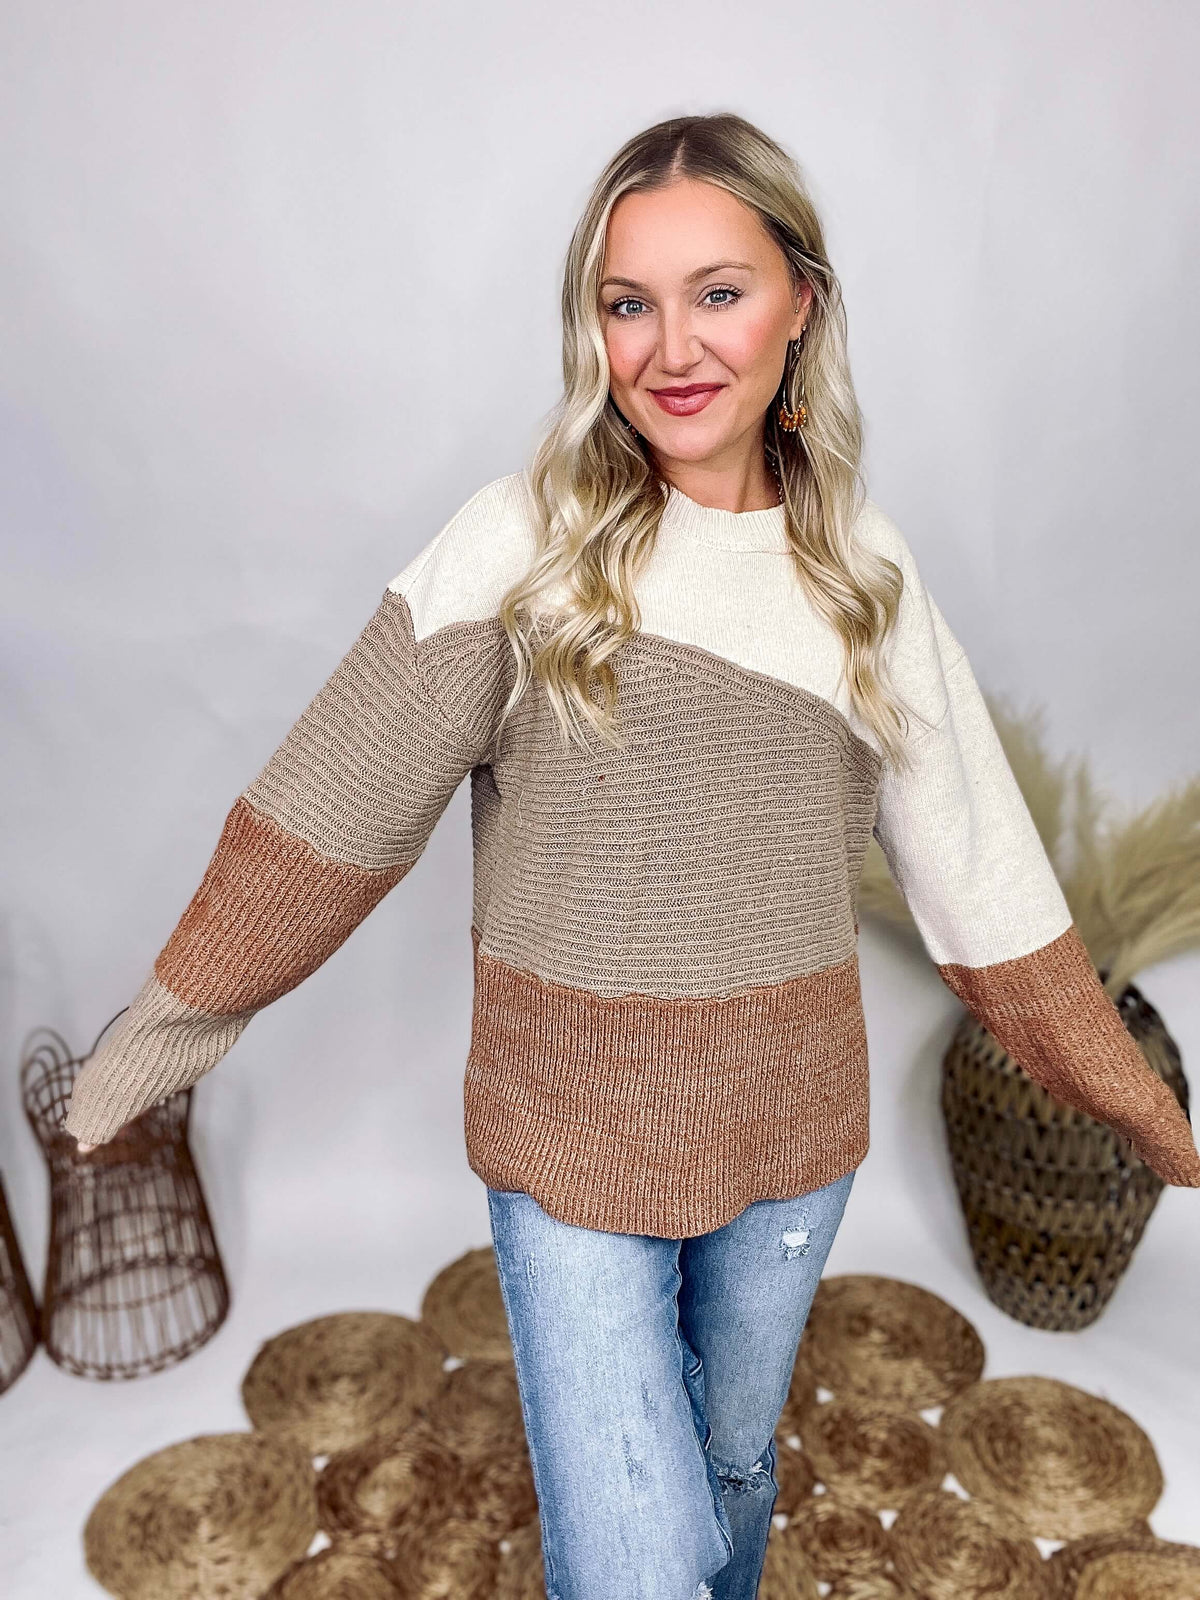 Very J Mocha Neutral Mix Diagonal Colorblock Sweater Knit Top Ribbed Details Round Neck Drop Shoulder Relaxed Fit 75% Polyester, 20% Acrylic, 5% Viscose